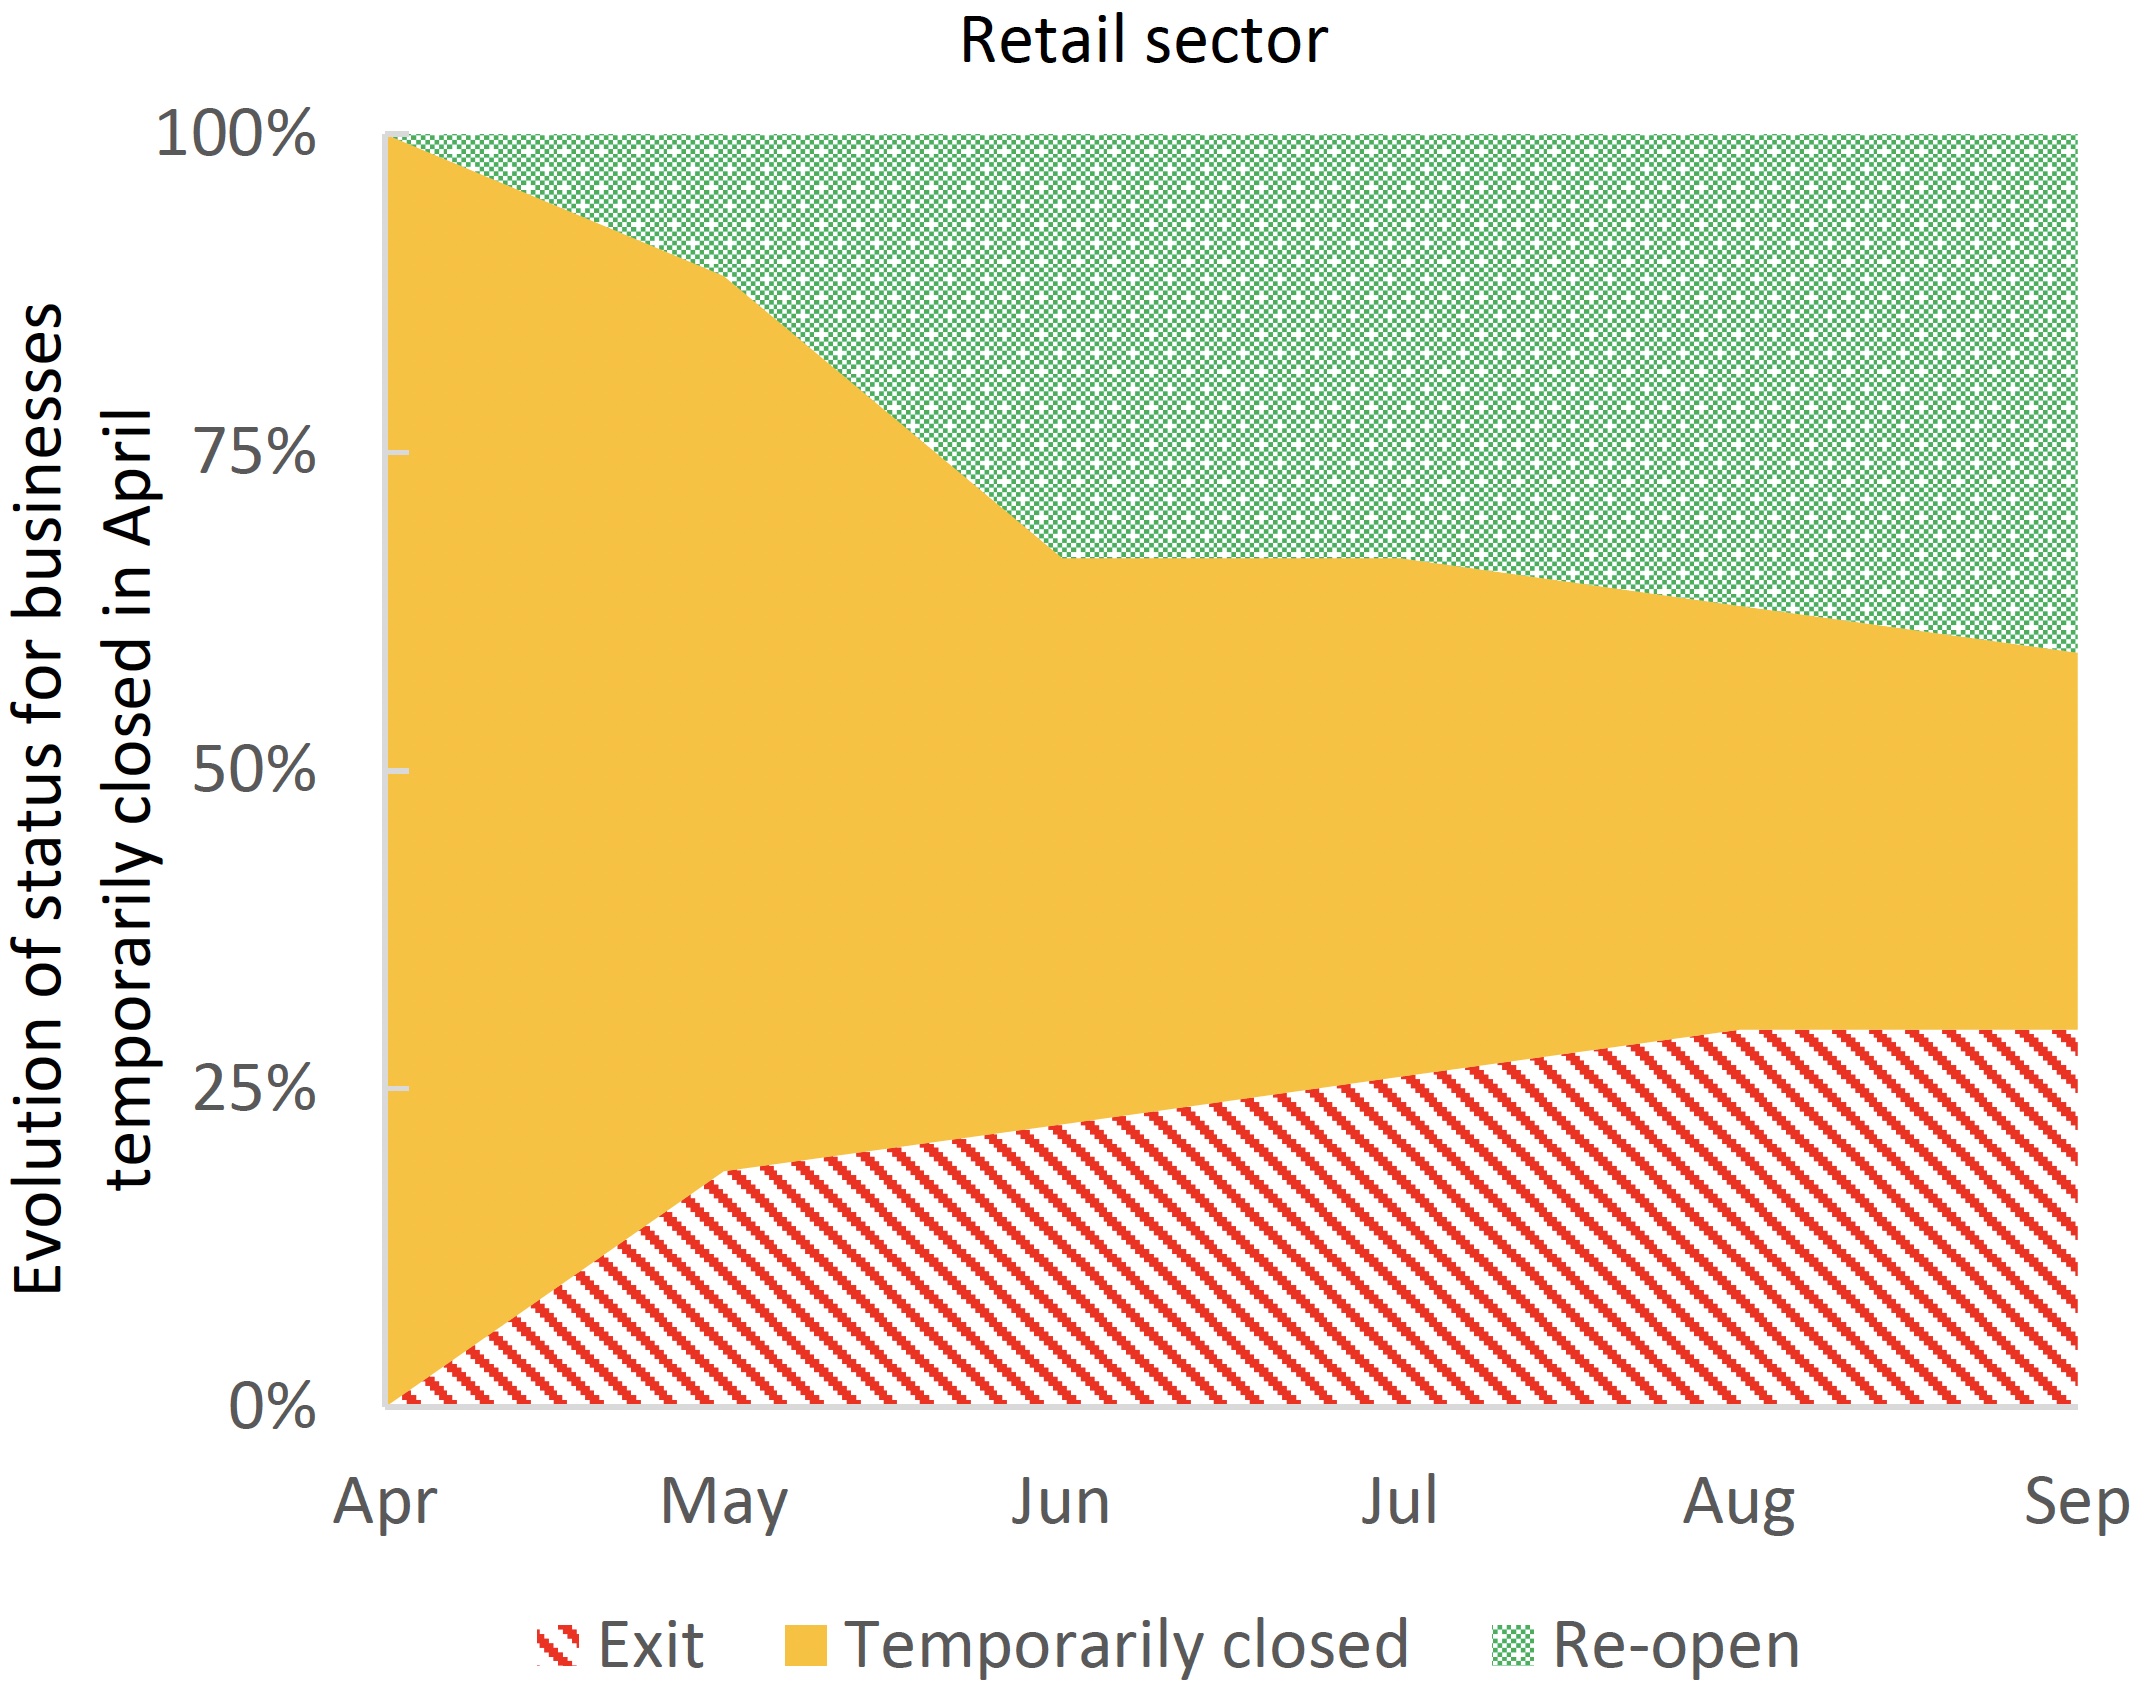 Measuring business openings and closures in real time 6